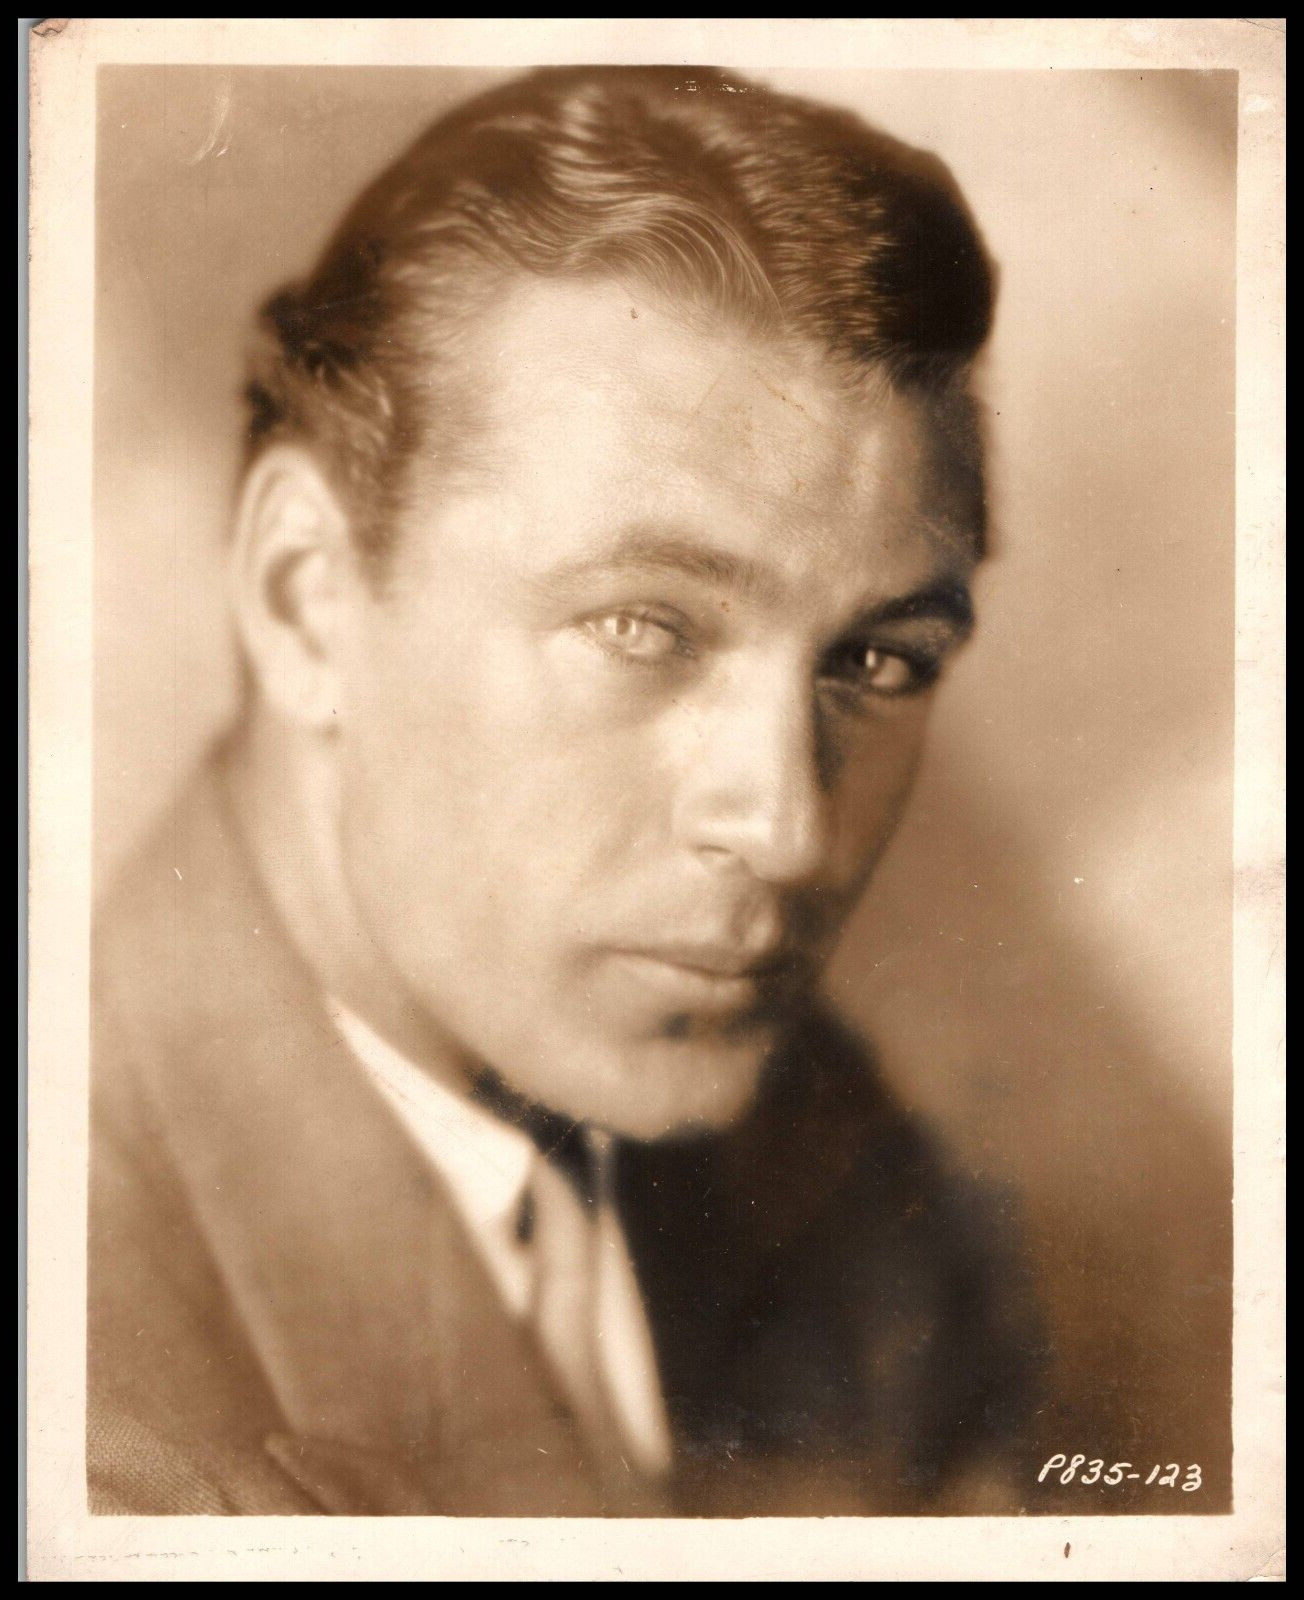 HOLLYWOOD LEGEND GARY COOPER EARLY PARAMOUNT PORTRAIT 1920s ORIG Photo 701